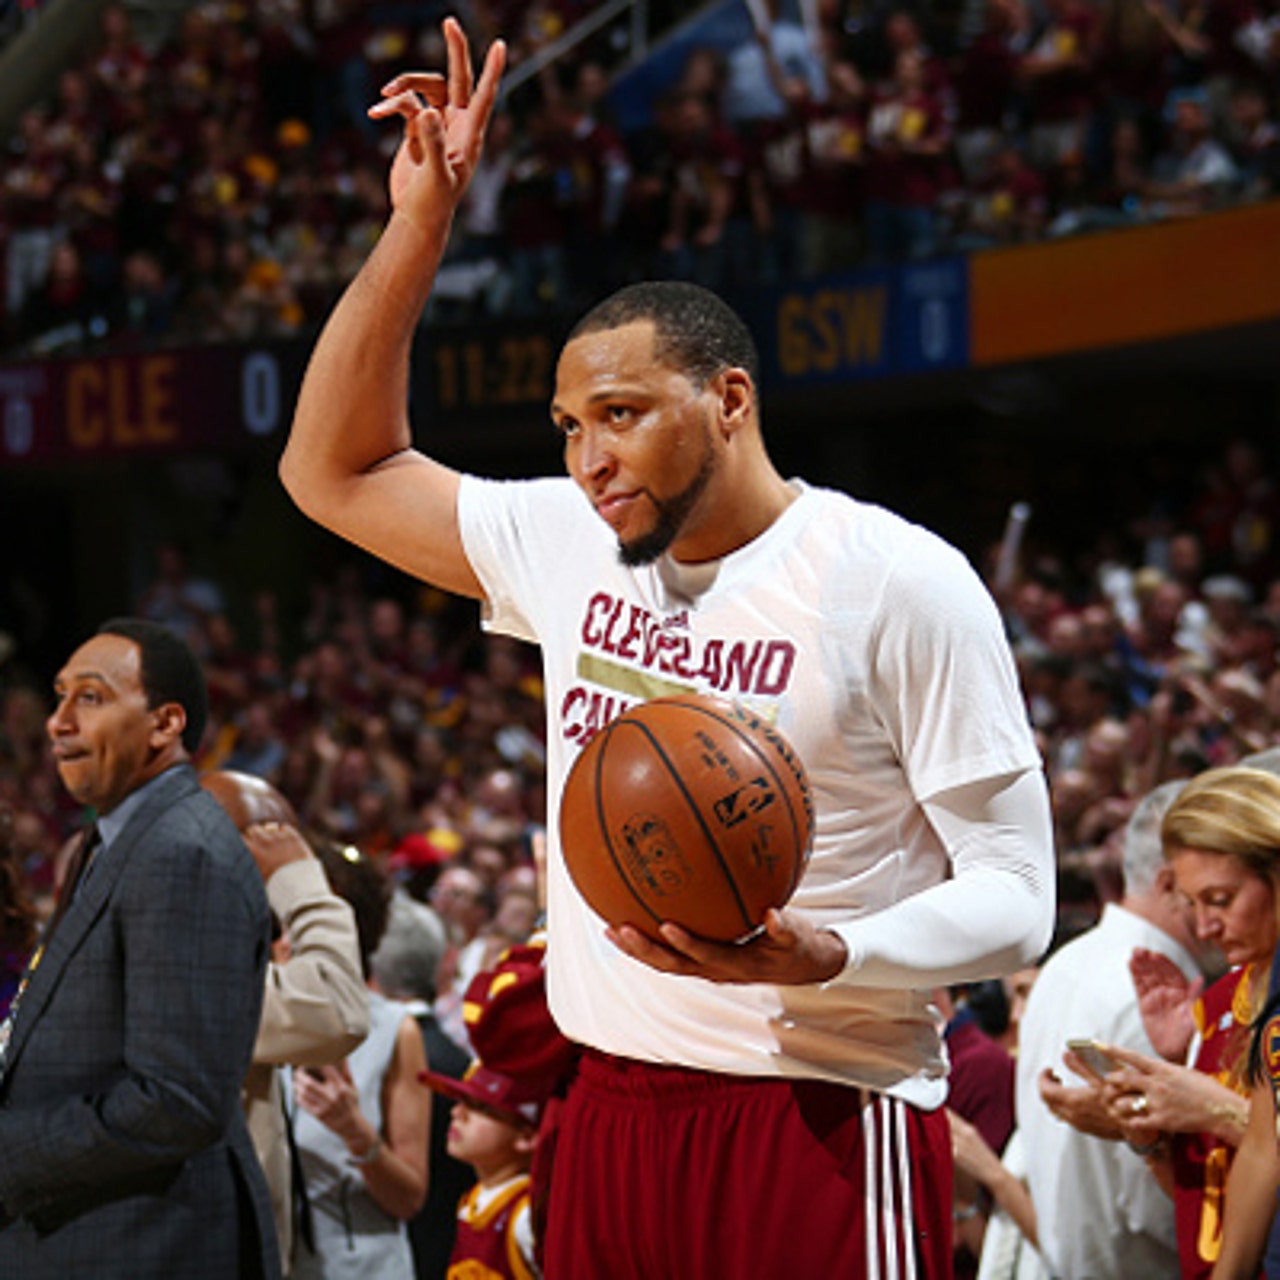 Shawn Marion says he's retiring after 16 seasons